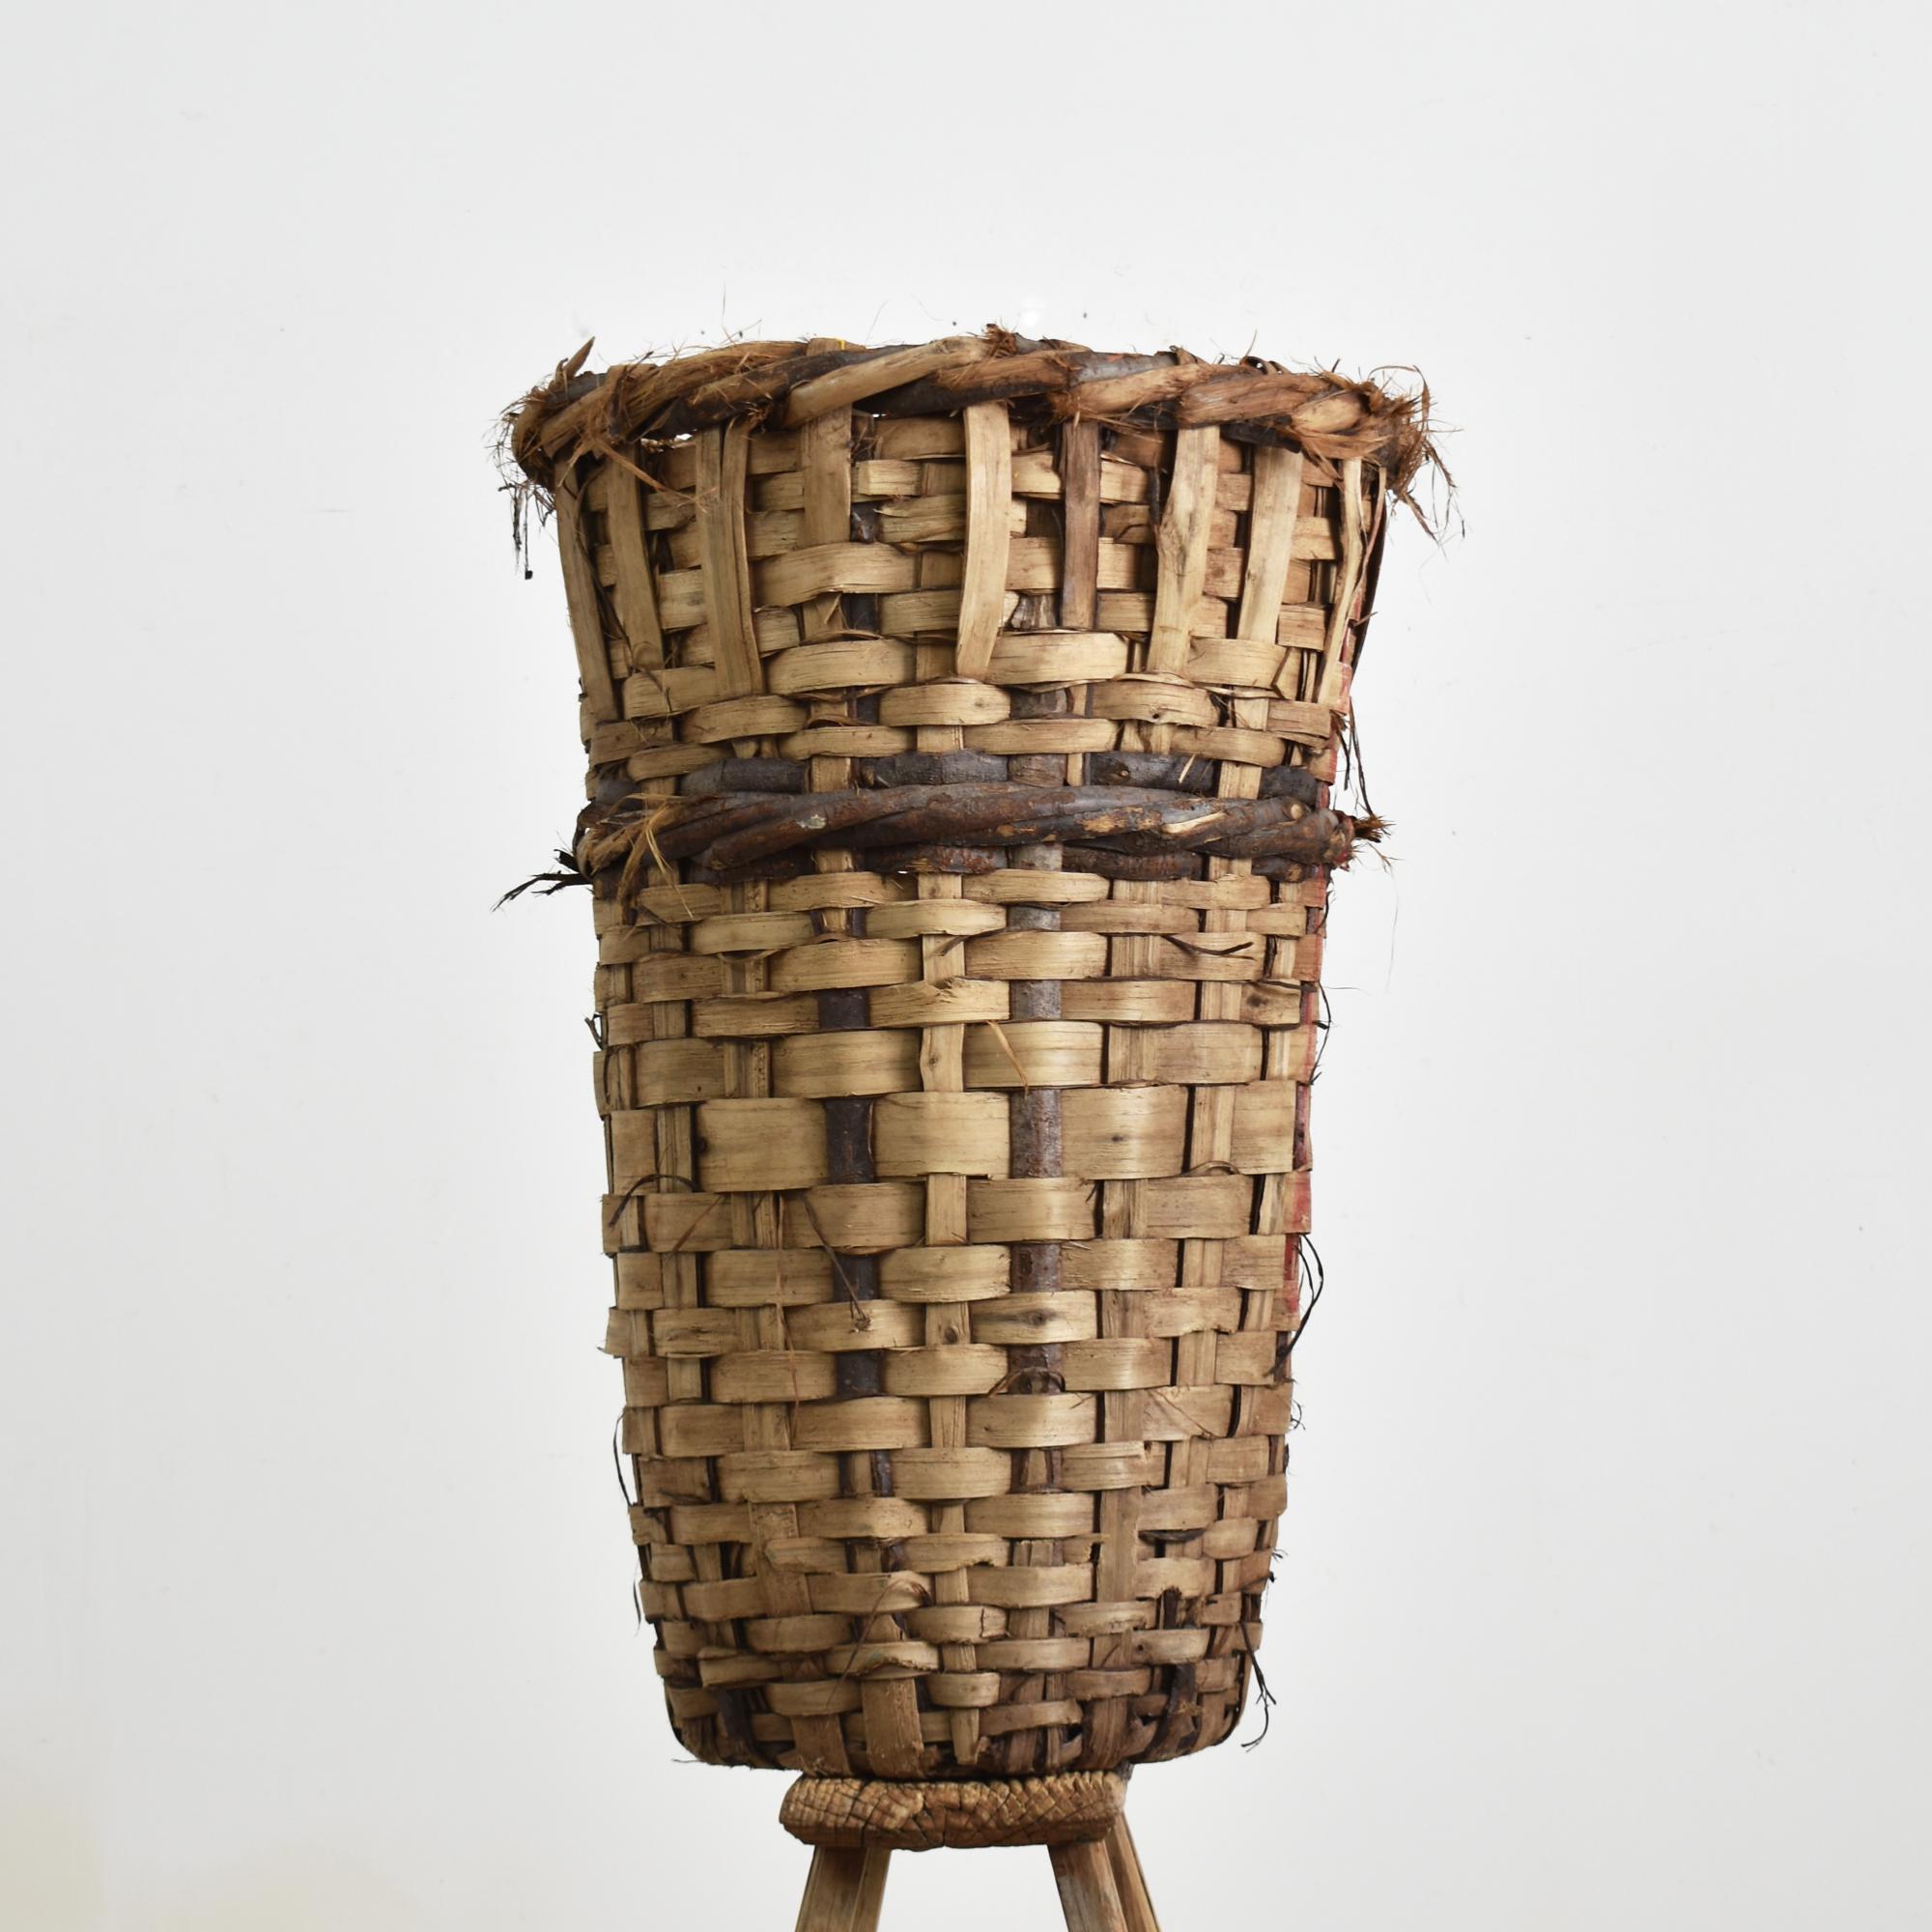 Antique Grape Harvest Log Basket – B

A beautiful hand-made wicker basket from Turkey used to harvest grapes. The basket is constructed from a thick weave designed to withstand the heavy use of grape harvesting The painted markings on the side